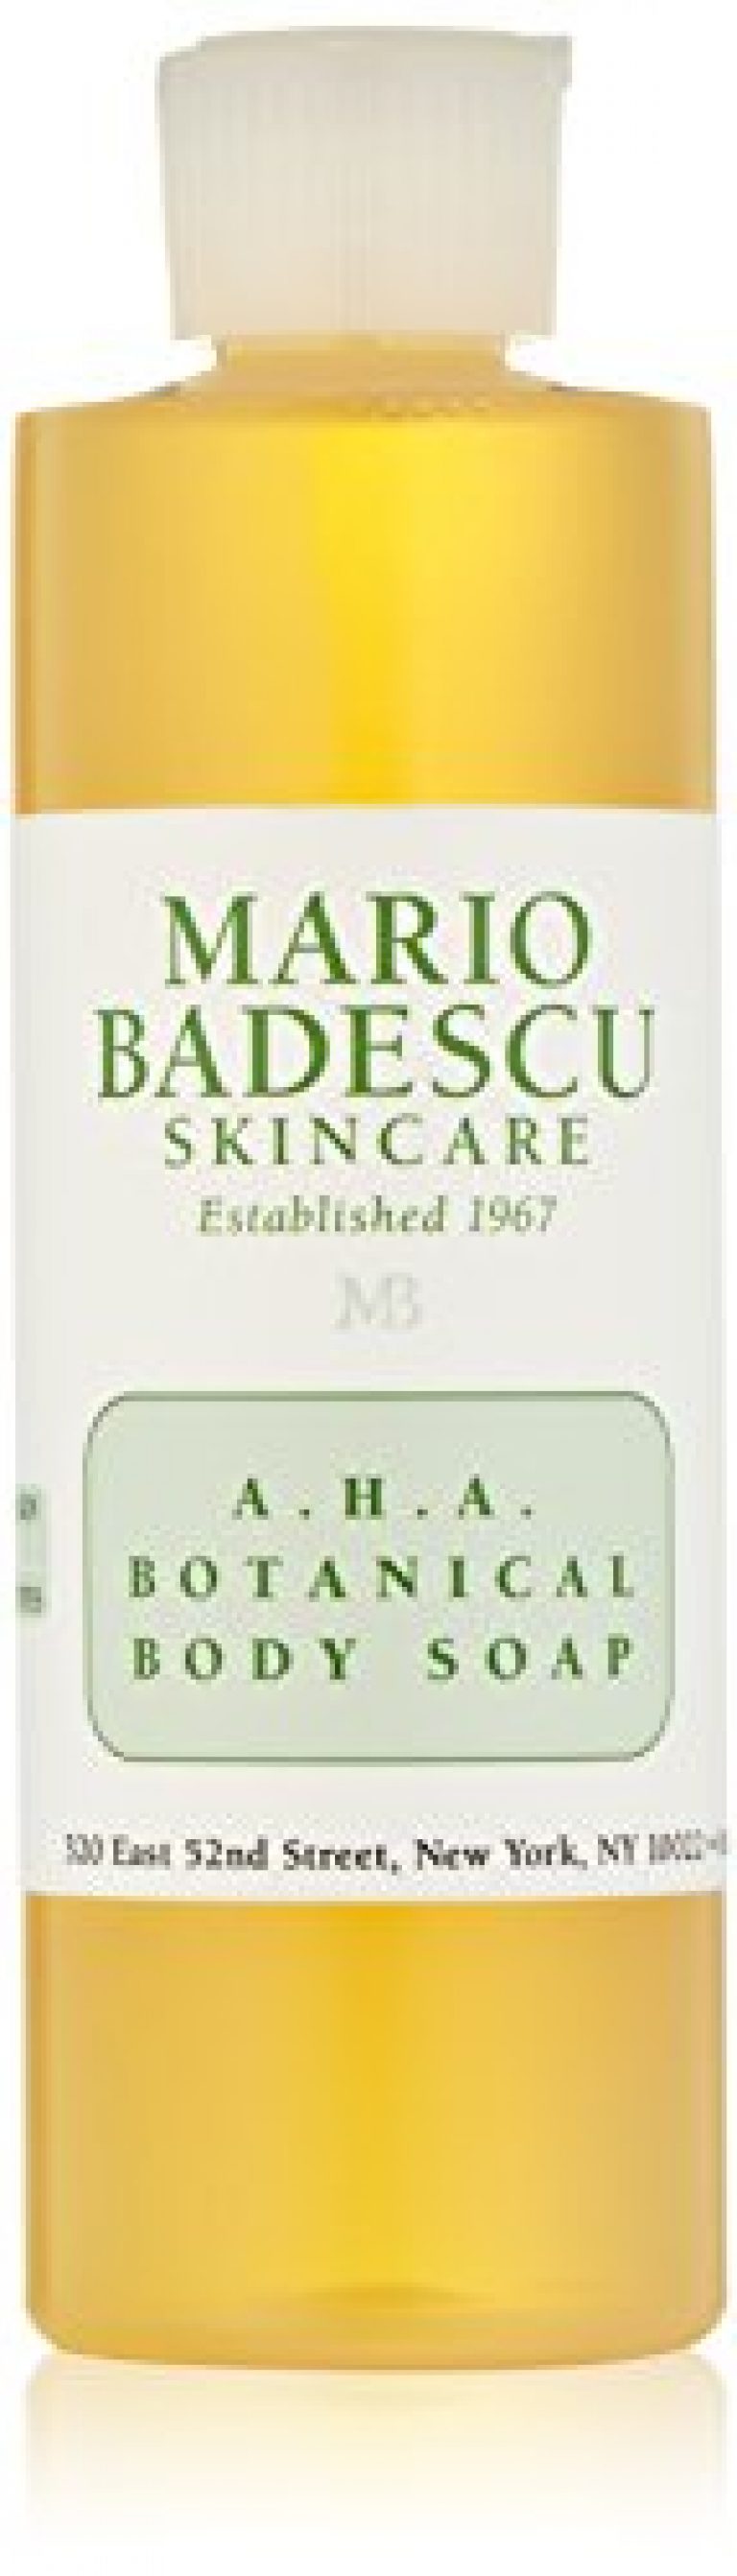 Mario Badescu AHA Botanical Body Wash Moisturizing, Clarifying and Gentle Exfoliating Body Wash for Brighter, Softer and Smoother Skin, Body Soap Infused with Glycolic Acid & Fruit Enzymes, 8 Fl Oz 1